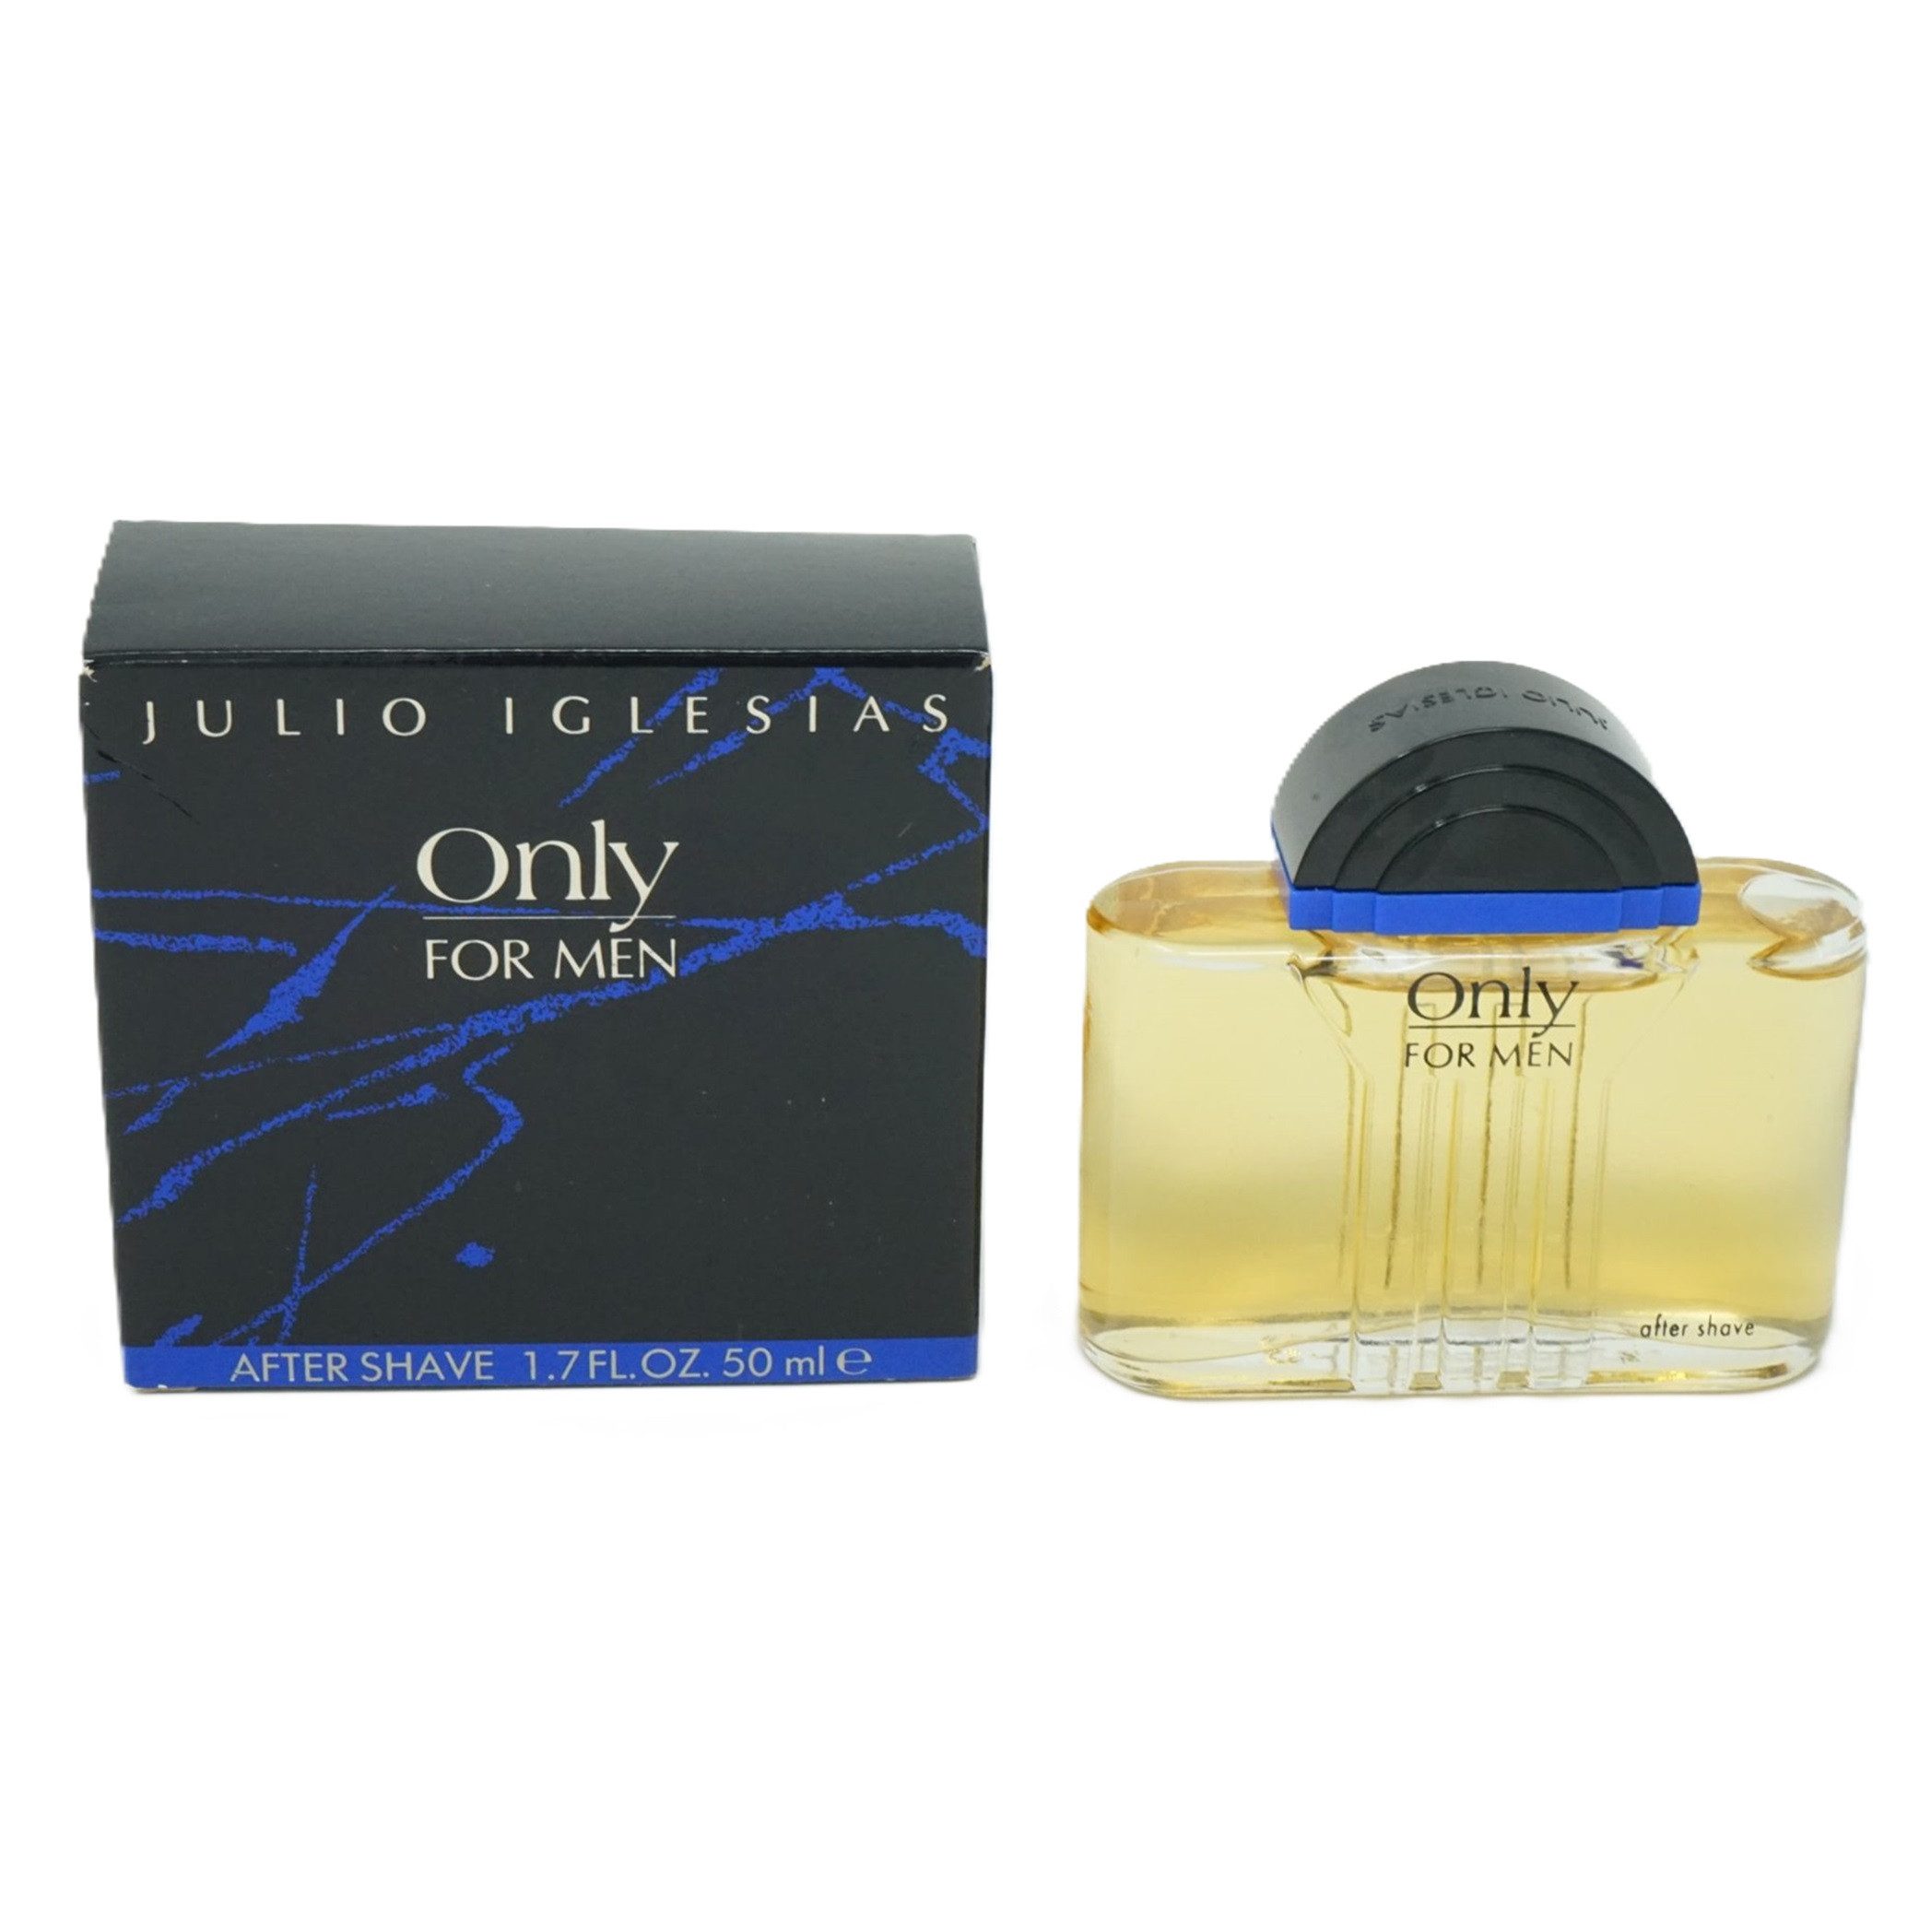 LAMBORGHINI After-Shave Julio Iglesias Only For Men After Shave 50 ml